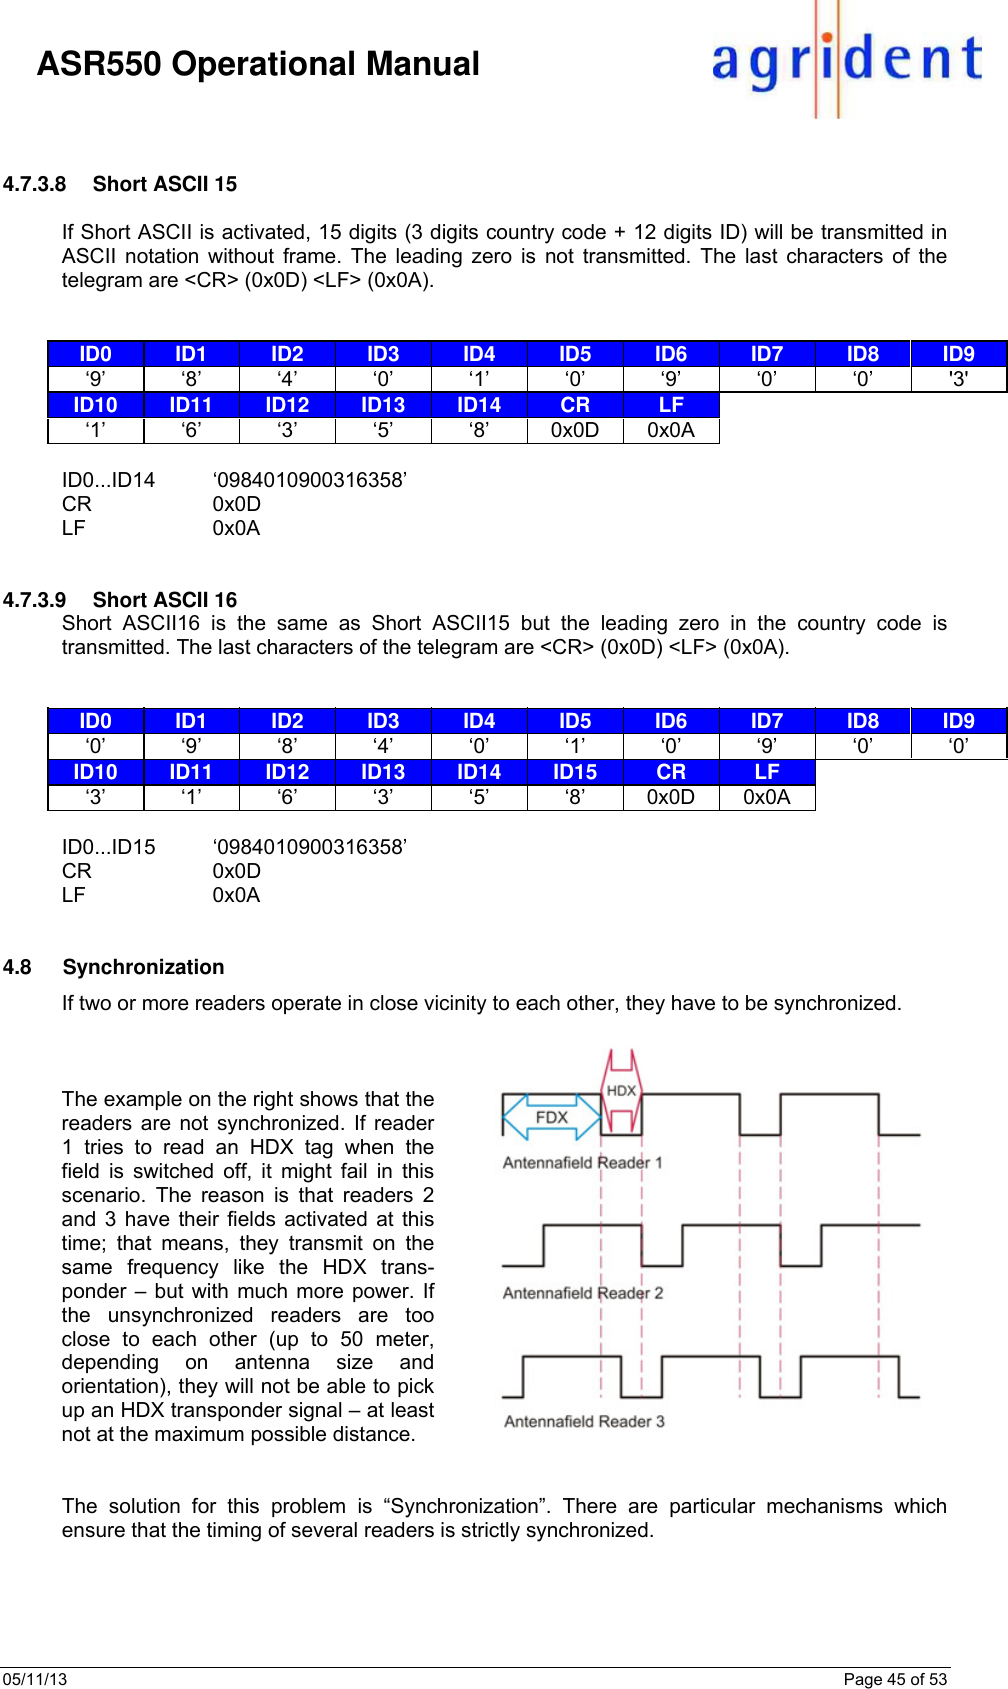 05/11/13    Page 45 of 53     ASR550 Operational Manual   4.7.3.8  Short ASCII 15  If Short ASCII is activated, 15 digits (3 digits country code + 12 digits ID) will be transmitted in ASCII notation without frame. The leading zero is not transmitted. The last characters of the telegram are &lt;CR&gt; (0x0D) &lt;LF&gt; (0x0A).    ID0  ID1  ID2  ID3  ID4  ID5  ID6  ID7  ID8  ID9 ‘9’ ‘8’ ‘4’ ‘0’ ‘1’ ‘0’ ‘9’ ‘0’ ‘0’ &apos;3&apos; ID10  ID11  ID12  ID13  ID14  CR  LF      ‘1’ ‘6’ ‘3’ ‘5’ ‘8’ 0x0D 0x0A       ID0...ID14 ‘0984010900316358’ CR 0x0D LF 0x0A   4.7.3.9  Short ASCII 16 Short ASCII16 is the same as Short ASCII15 but the leading zero in the country code is transmitted. The last characters of the telegram are &lt;CR&gt; (0x0D) &lt;LF&gt; (0x0A).   ID0  ID1  ID2  ID3  ID4  ID5  ID6  ID7  ID8  ID9 ‘0’ ‘9’ ‘8’ ‘4’ ‘0’ ‘1’ ‘0’ ‘9’ ‘0’ ‘0’ ID10  ID11  ID12  ID13  ID14  ID15  CR  LF    ‘3’ ‘1’ ‘6’ ‘3’ ‘5’ ‘8’ 0x0D 0x0A     ID0...ID15 ‘0984010900316358’ CR 0x0D LF 0x0A   4.8 Synchronization If two or more readers operate in close vicinity to each other, they have to be synchronized.    The example on the right shows that the readers are not synchronized. If reader 1 tries to read an HDX tag when the field is switched off, it might fail in this scenario. The reason is that readers 2 and 3 have their fields activated at this time; that means, they transmit on the same frequency like the HDX trans-ponder – but with much more power. If the unsynchronized readers are too close to each other (up to 50 meter, depending on antenna size and orientation), they will not be able to pick up an HDX transponder signal – at least not at the maximum possible distance.   The solution for this problem is “Synchronization”. There are particular mechanisms which ensure that the timing of several readers is strictly synchronized.   